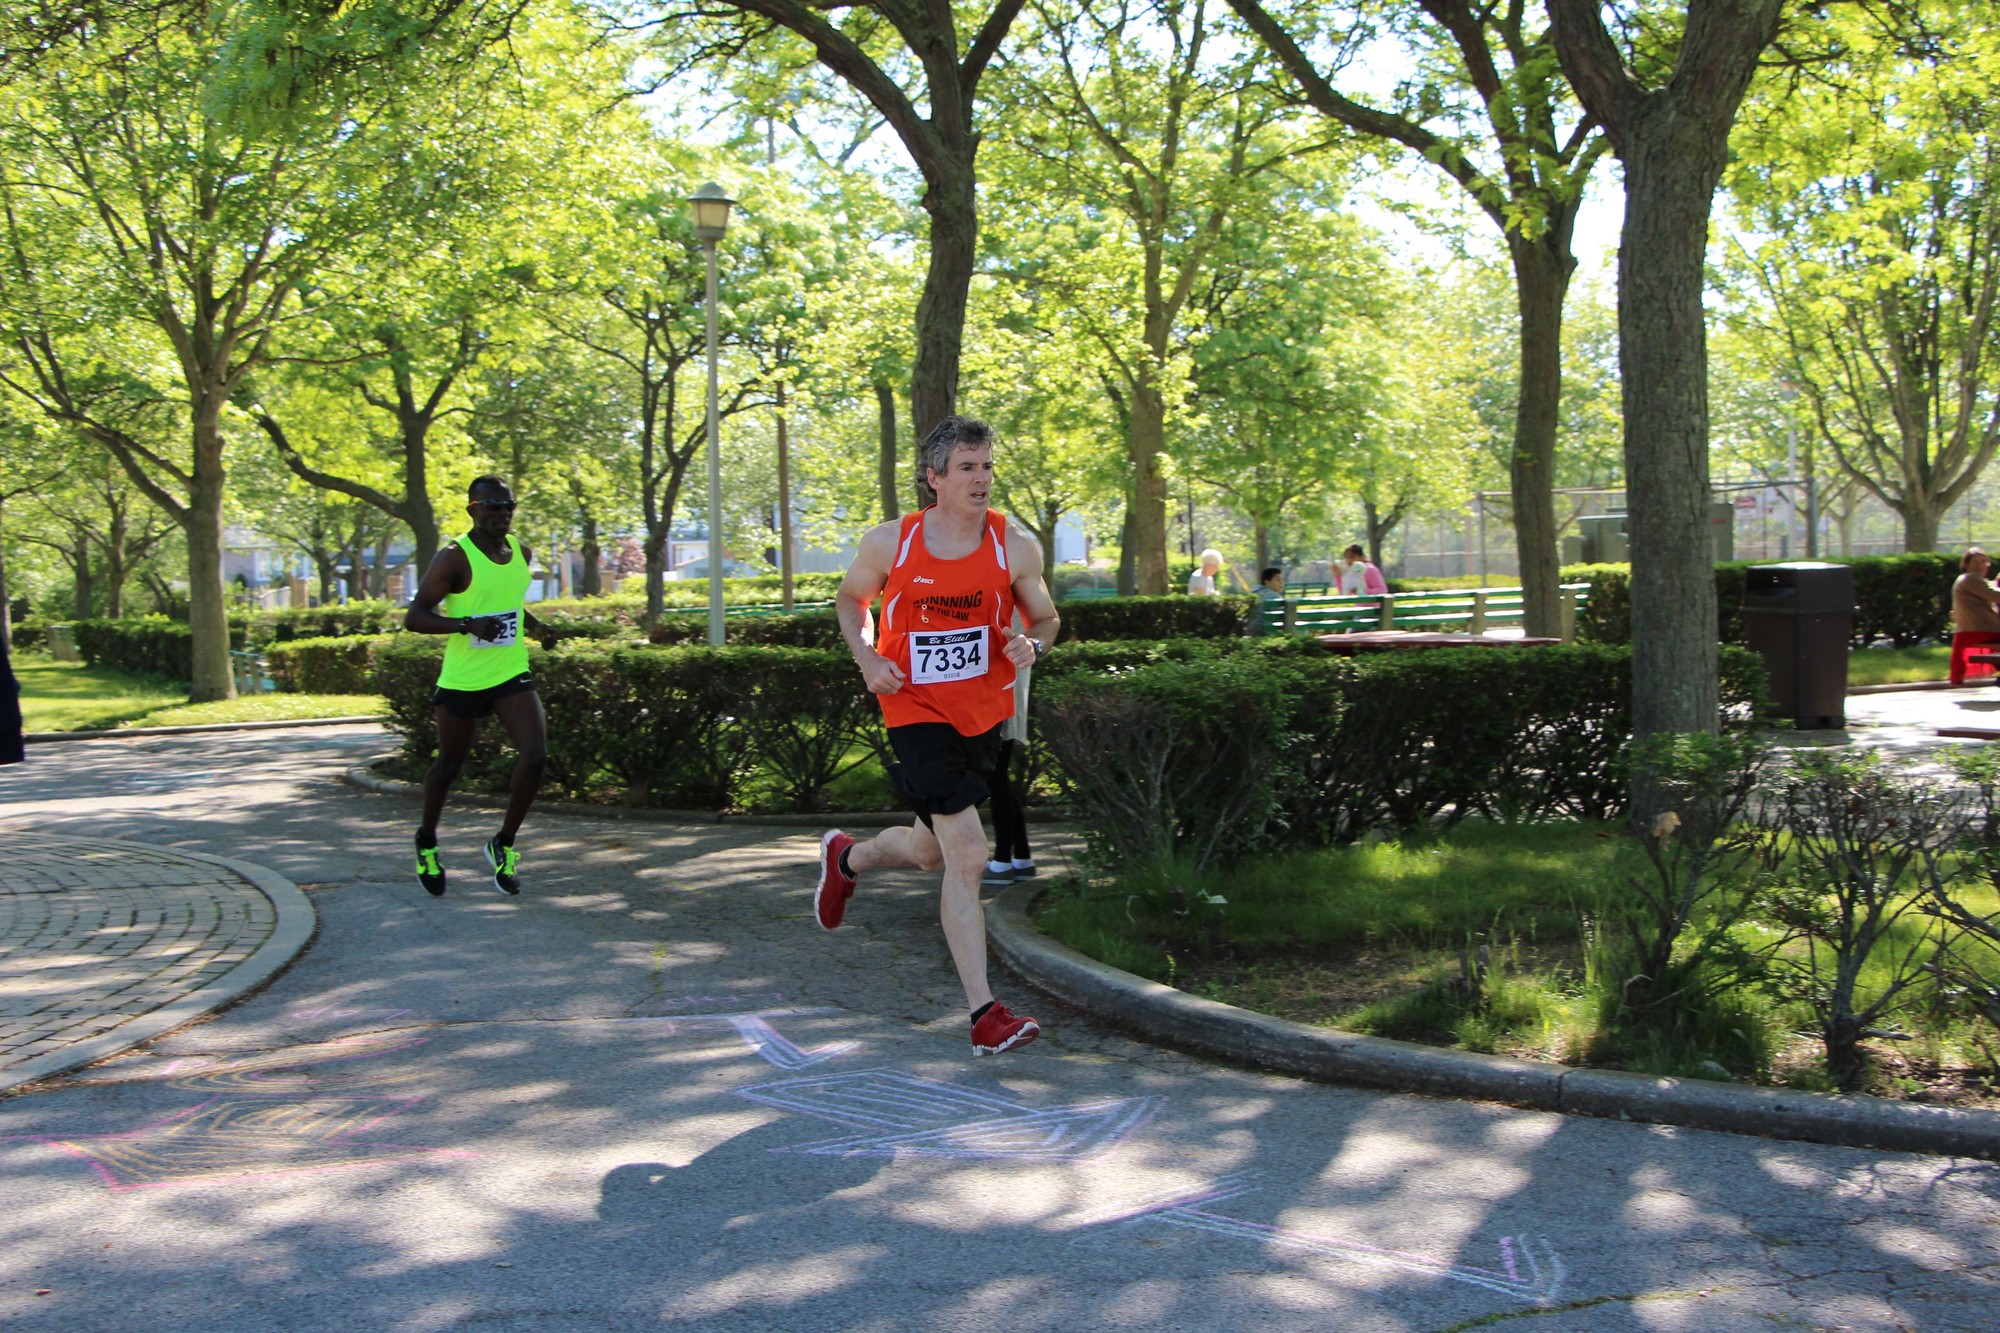 The pace was fast for second-place finisher Keith Guilfoyle, right, and Mwangi Gitahi close behind.